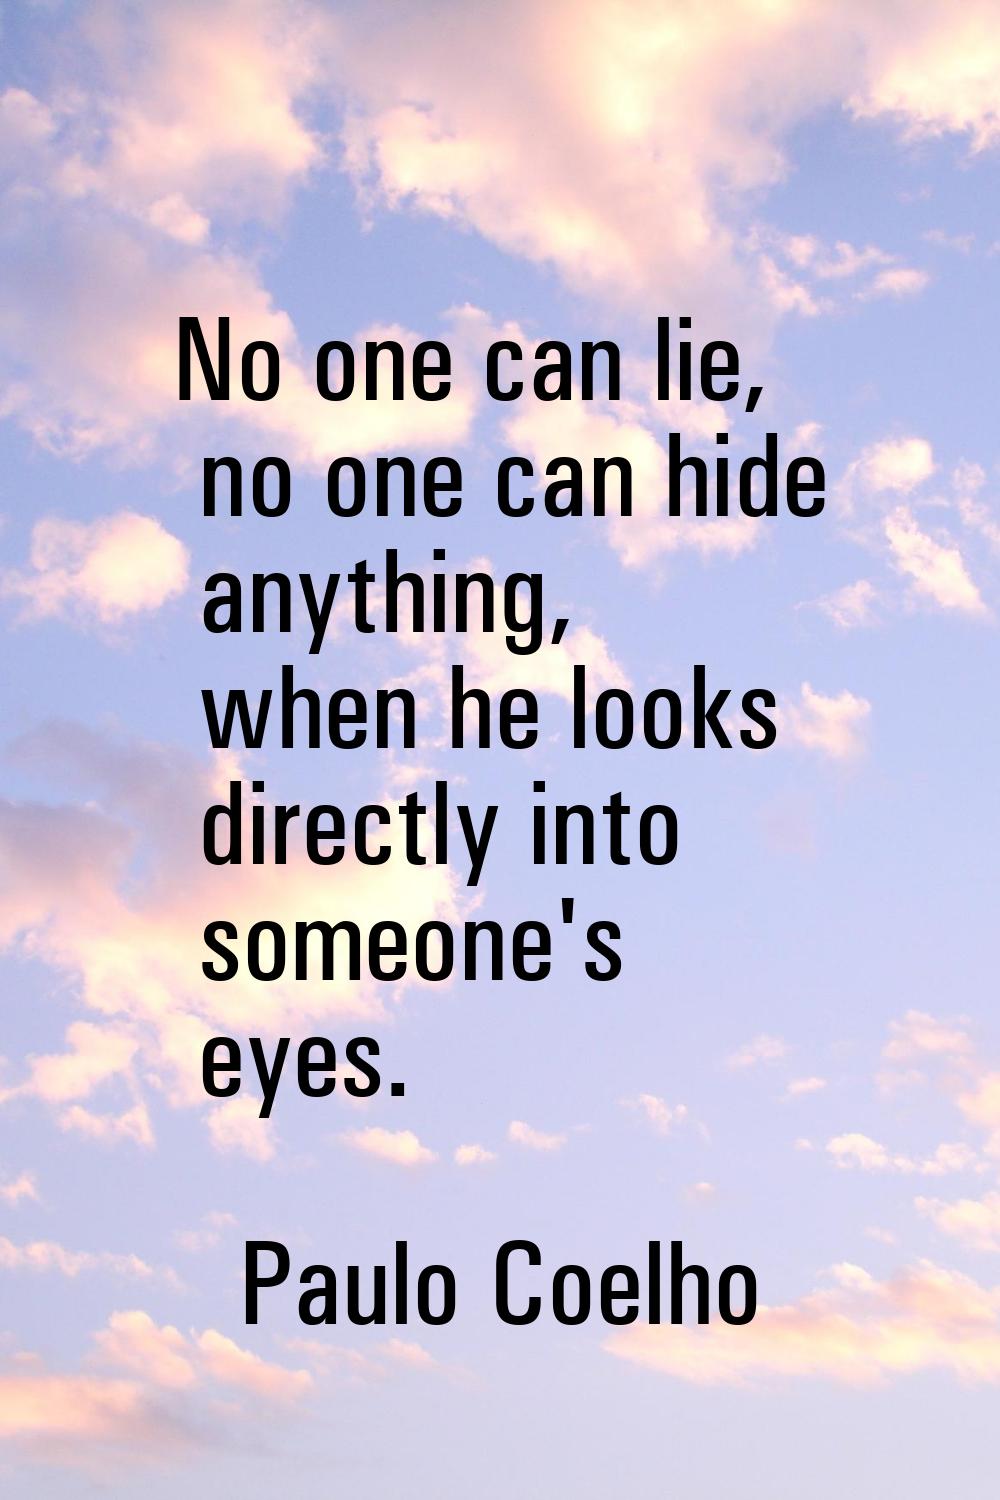 No one can lie, no one can hide anything, when he looks directly into someone's eyes.